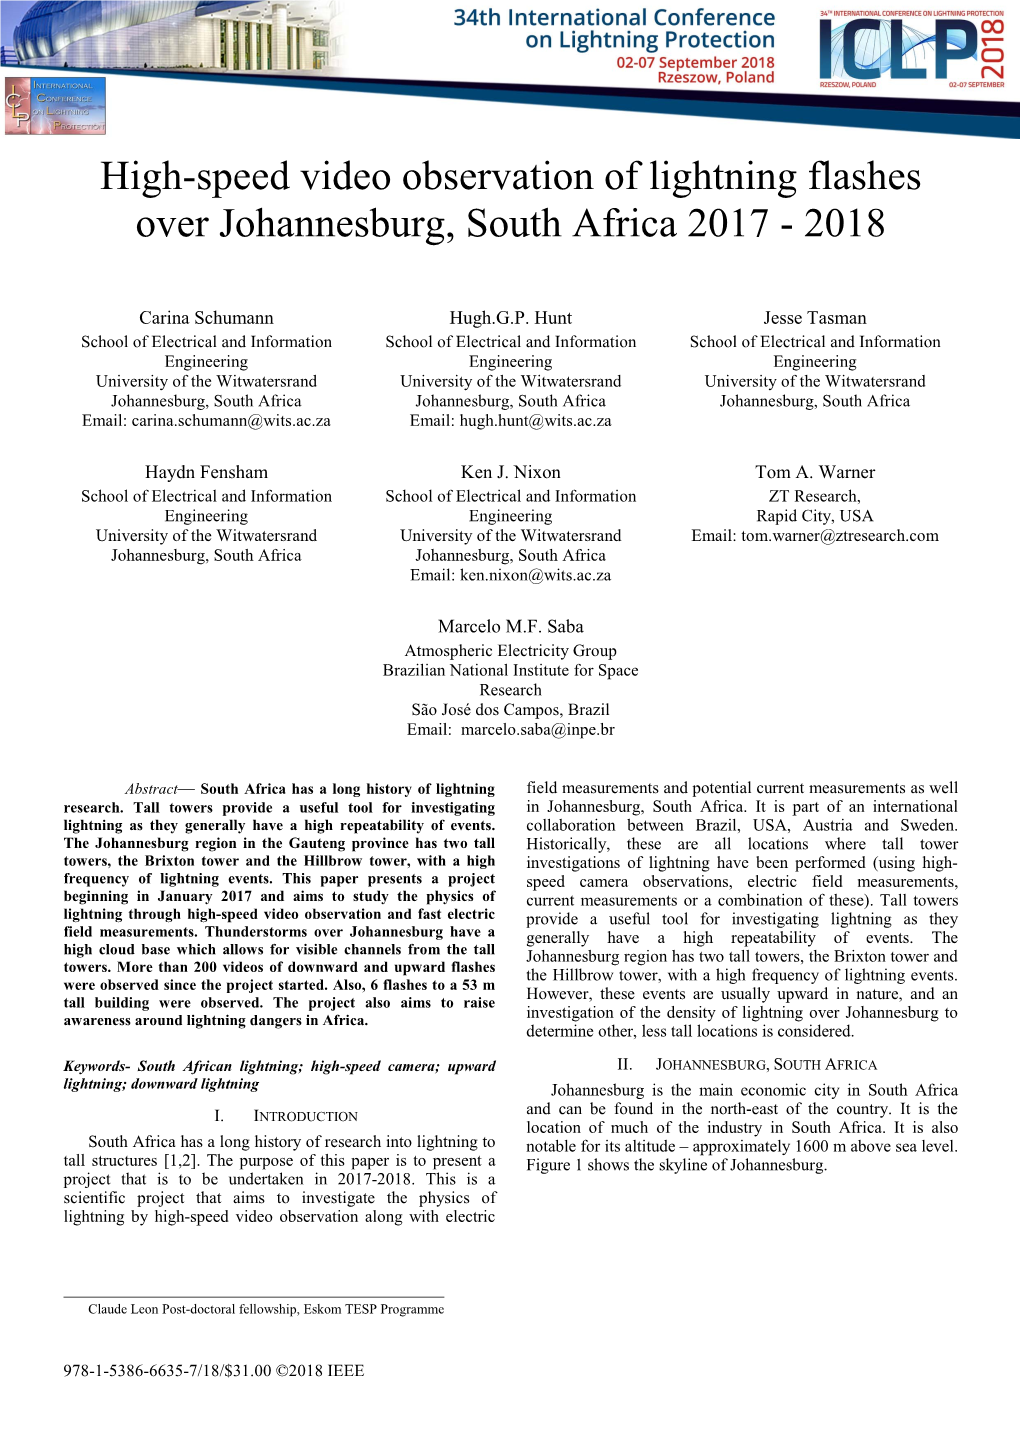 High-Speed Video Observation of Lightning Flashes Over Johannesburg, South Africa 2017 - 2018